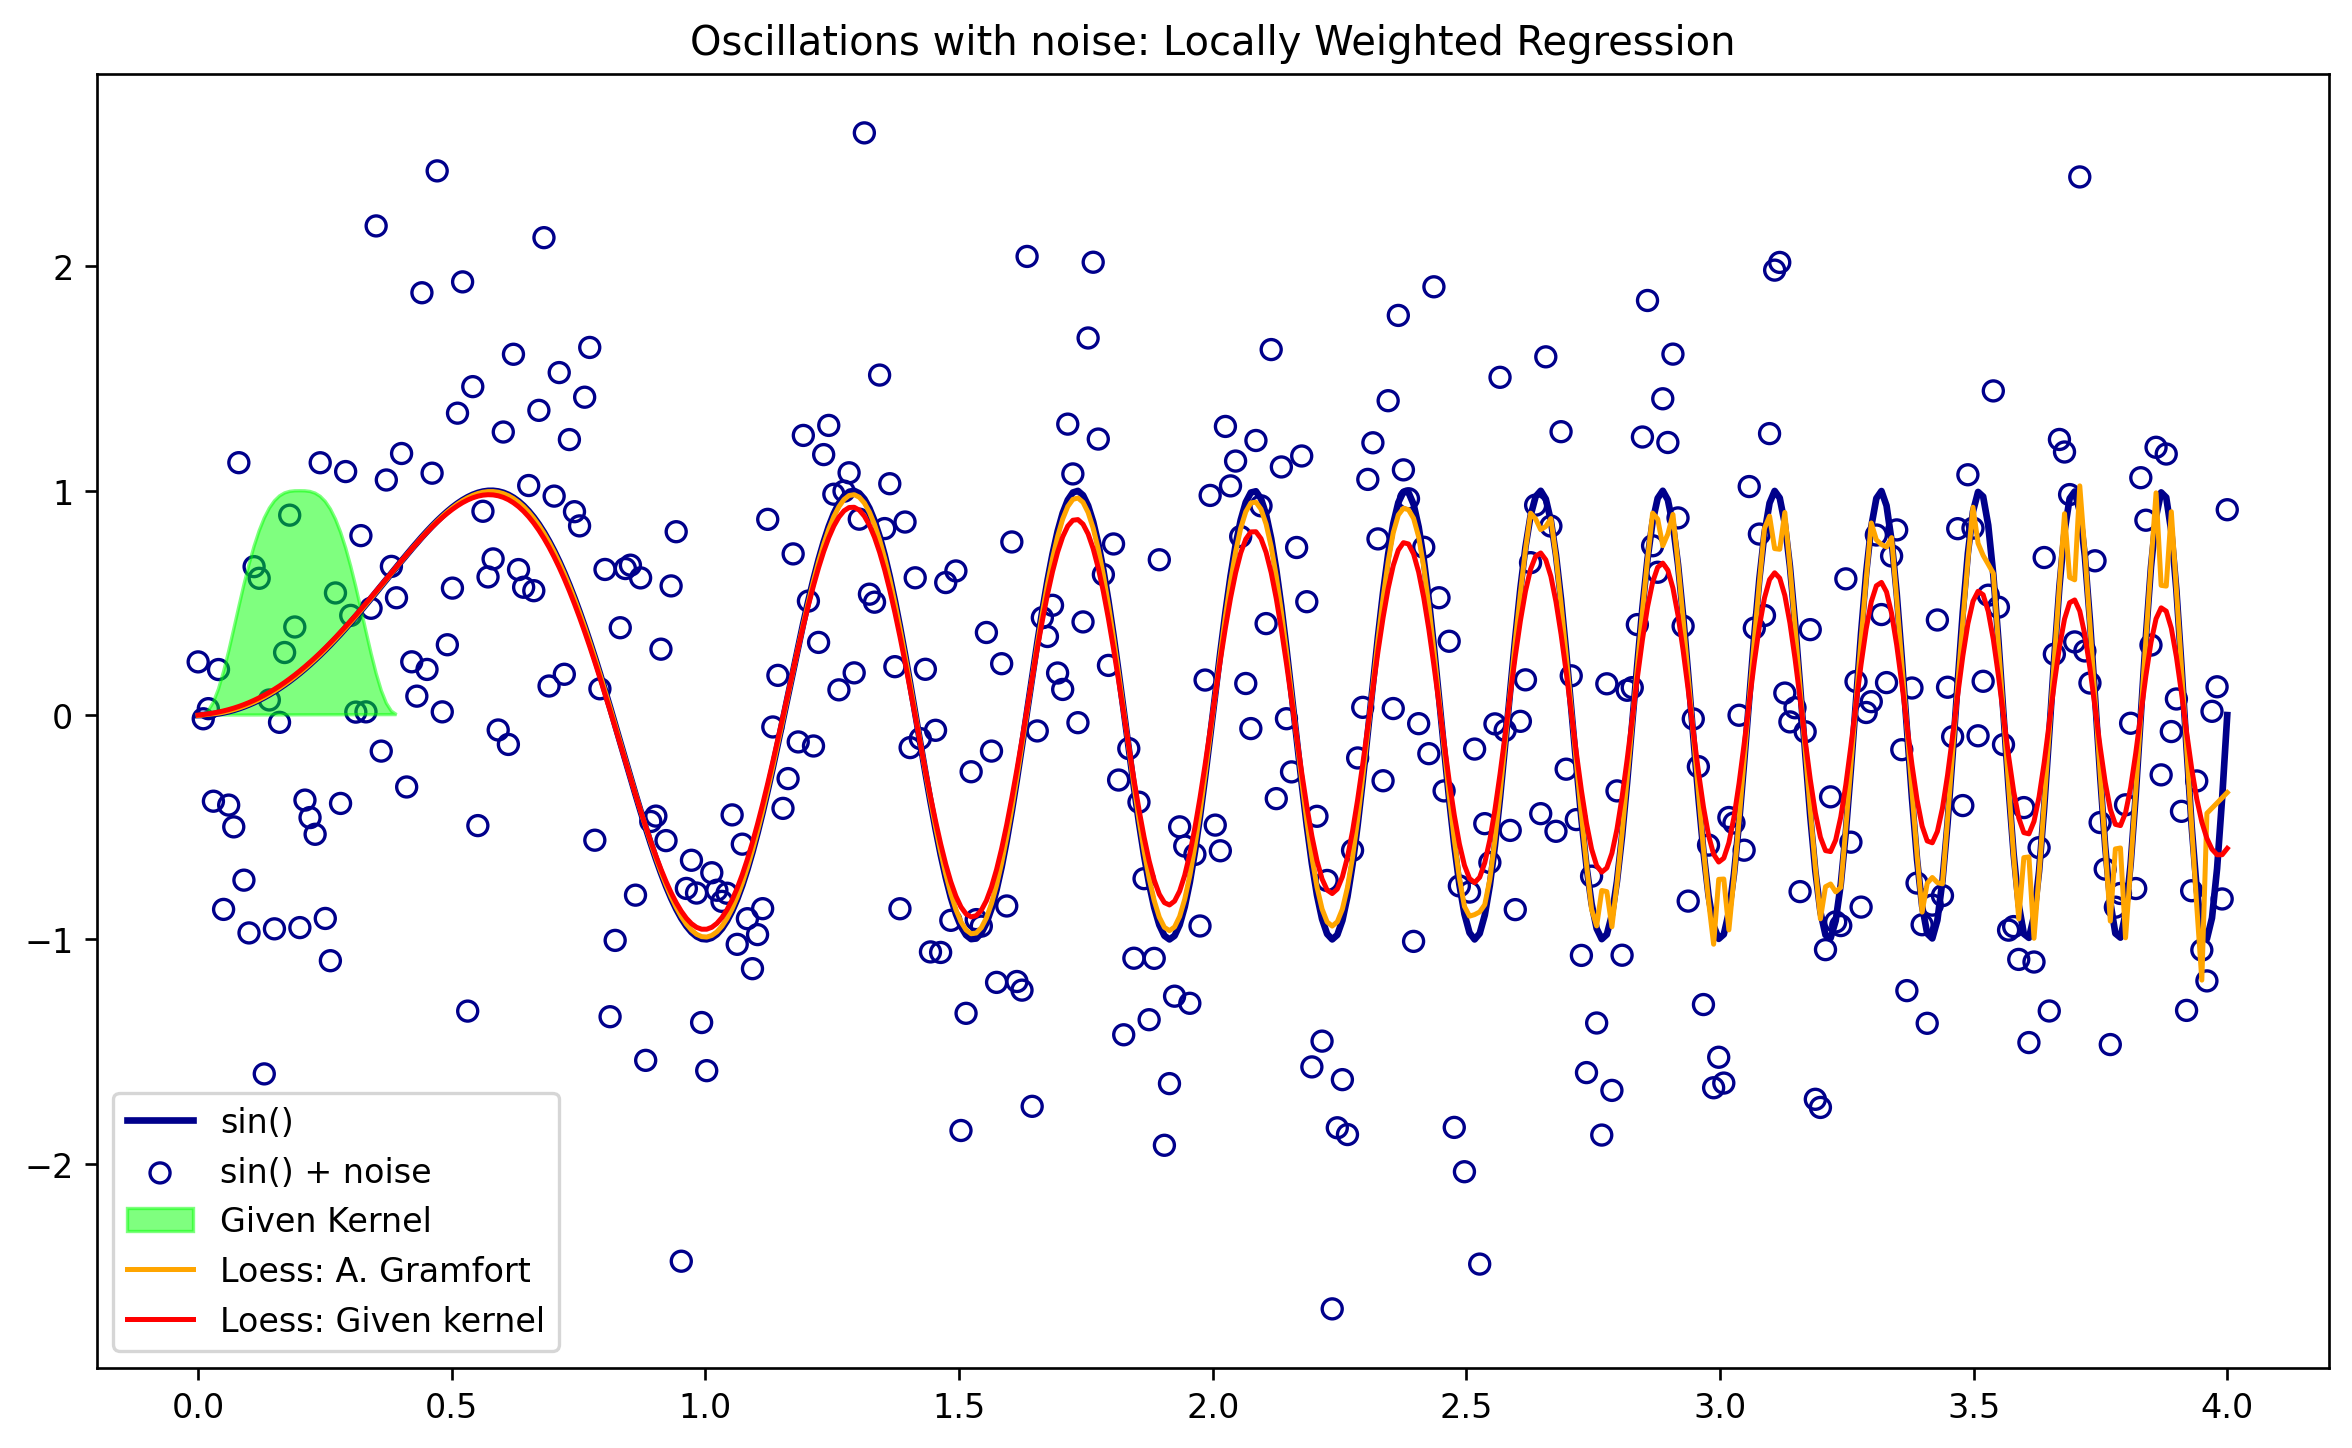 _images/Coding_Examples_Locally_Weighted_Regression_corr_14_0.png